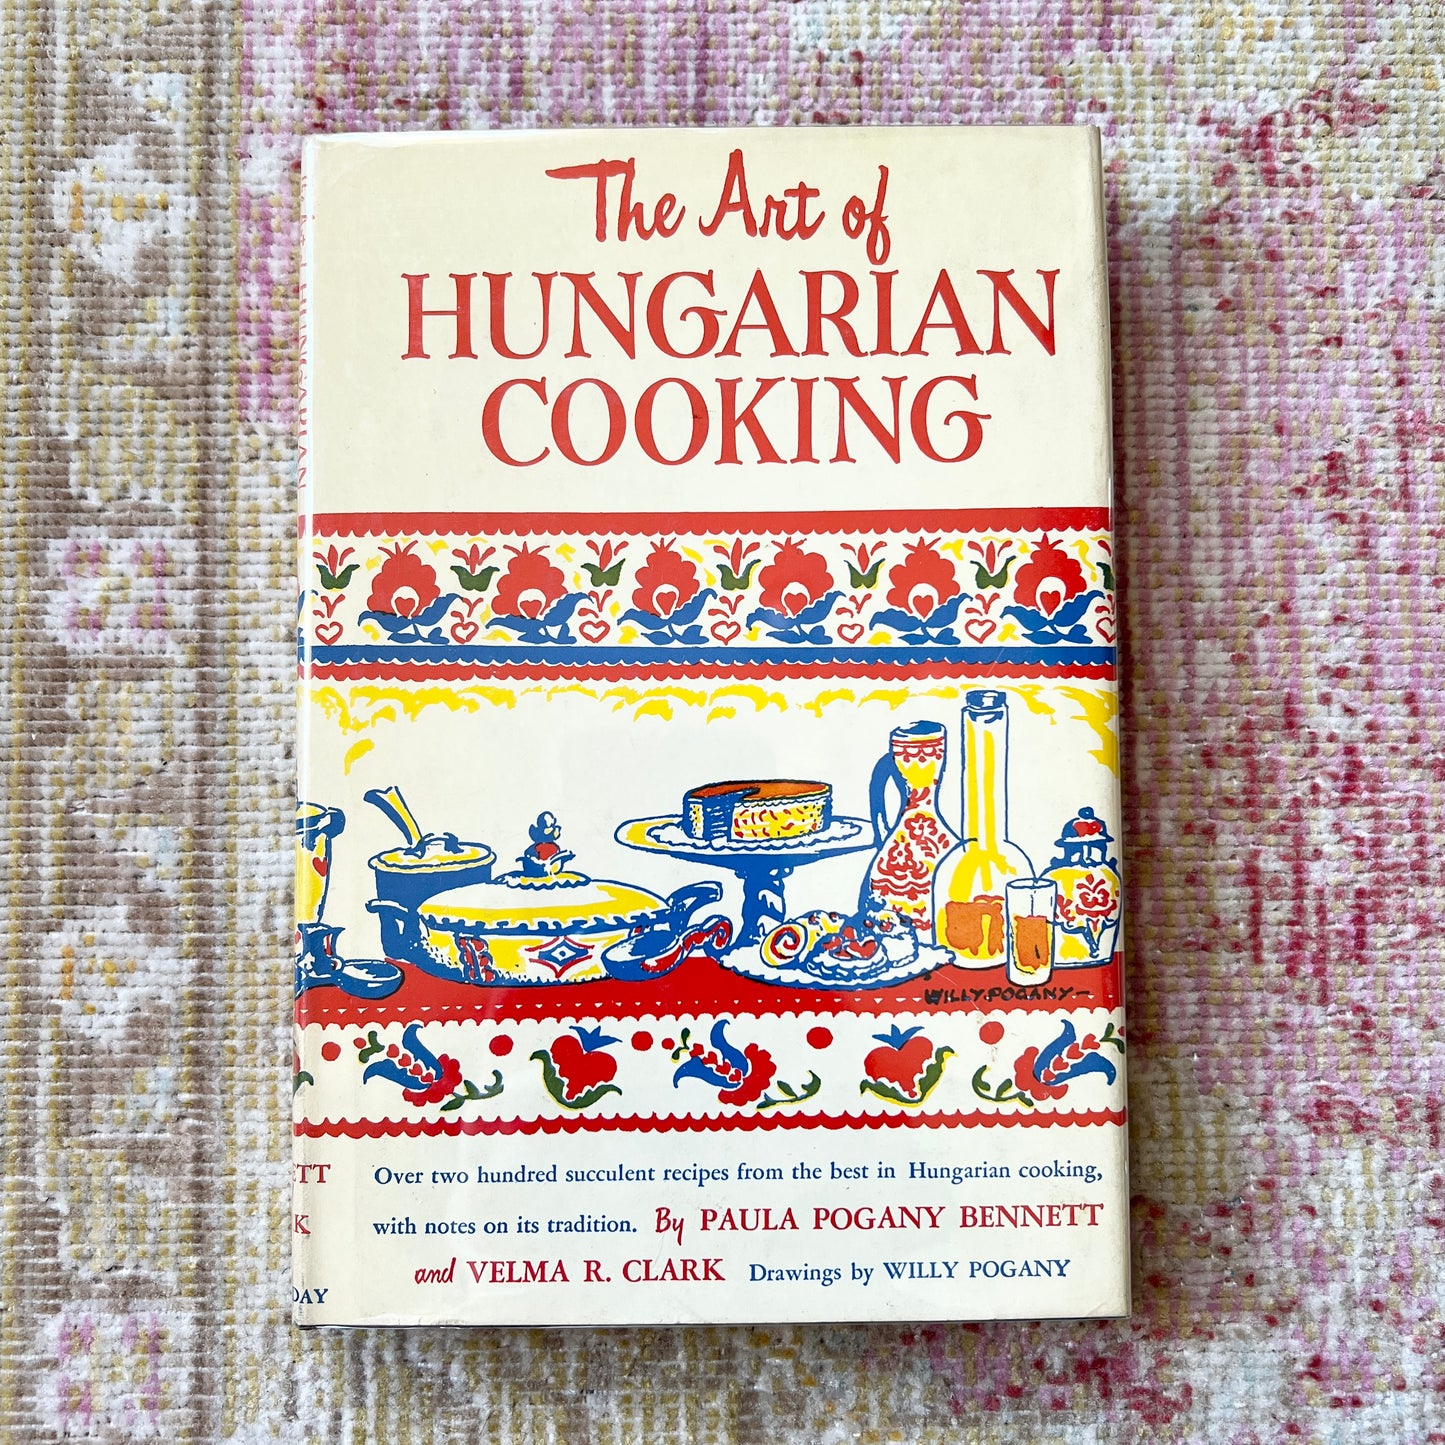 [AS-IS] 1954 "The Art of Hungarian Cooking" Hardcover Cookbook